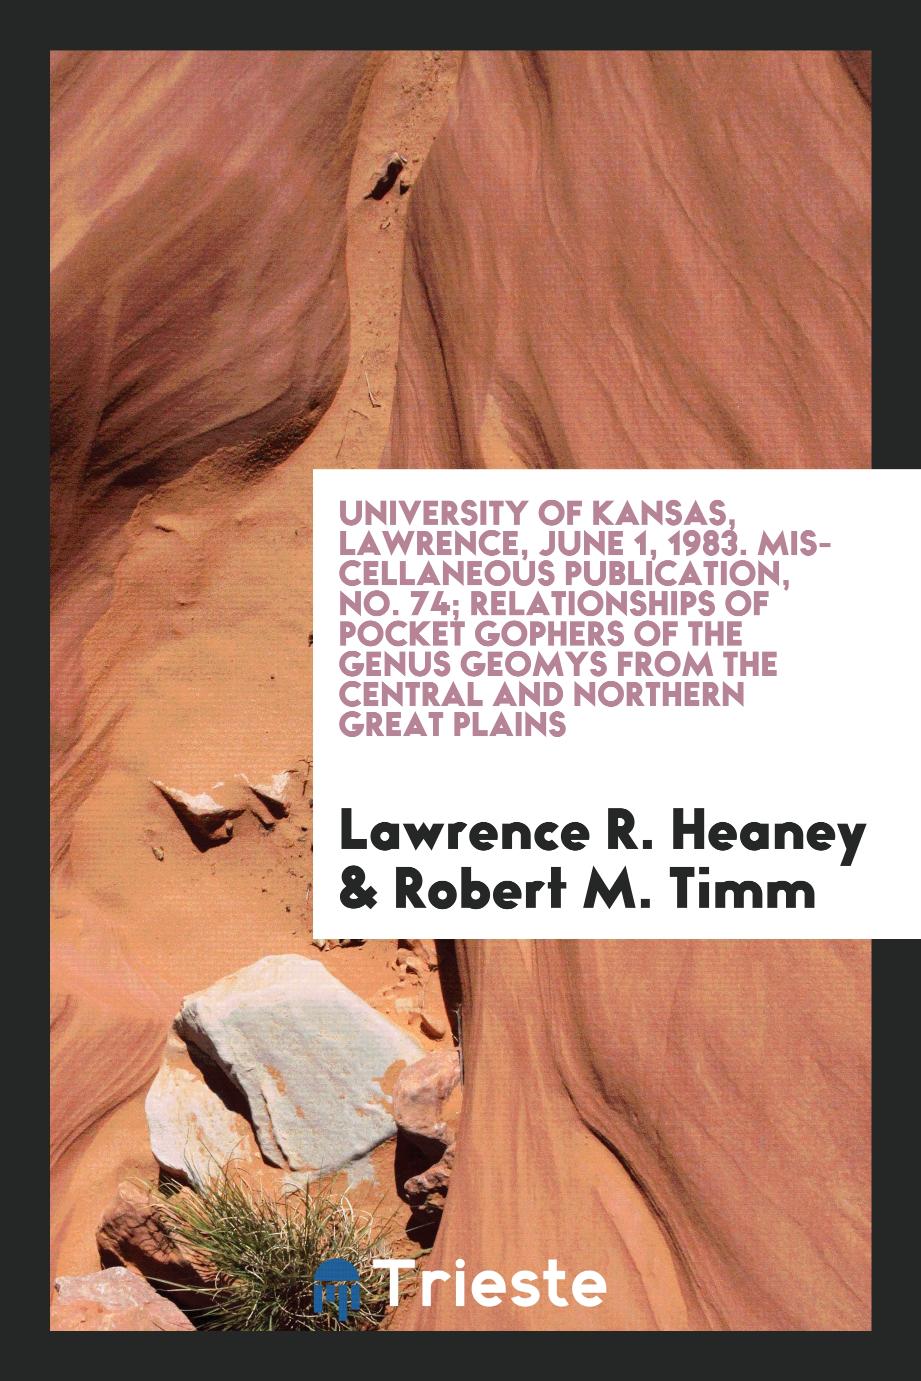 University of Kansas, Lawrence, June 1, 1983. Miscellaneous Publication, No. 74; Relationships of Pocket Gophers of the Genus Geomys from the Central and Northern Great Plains